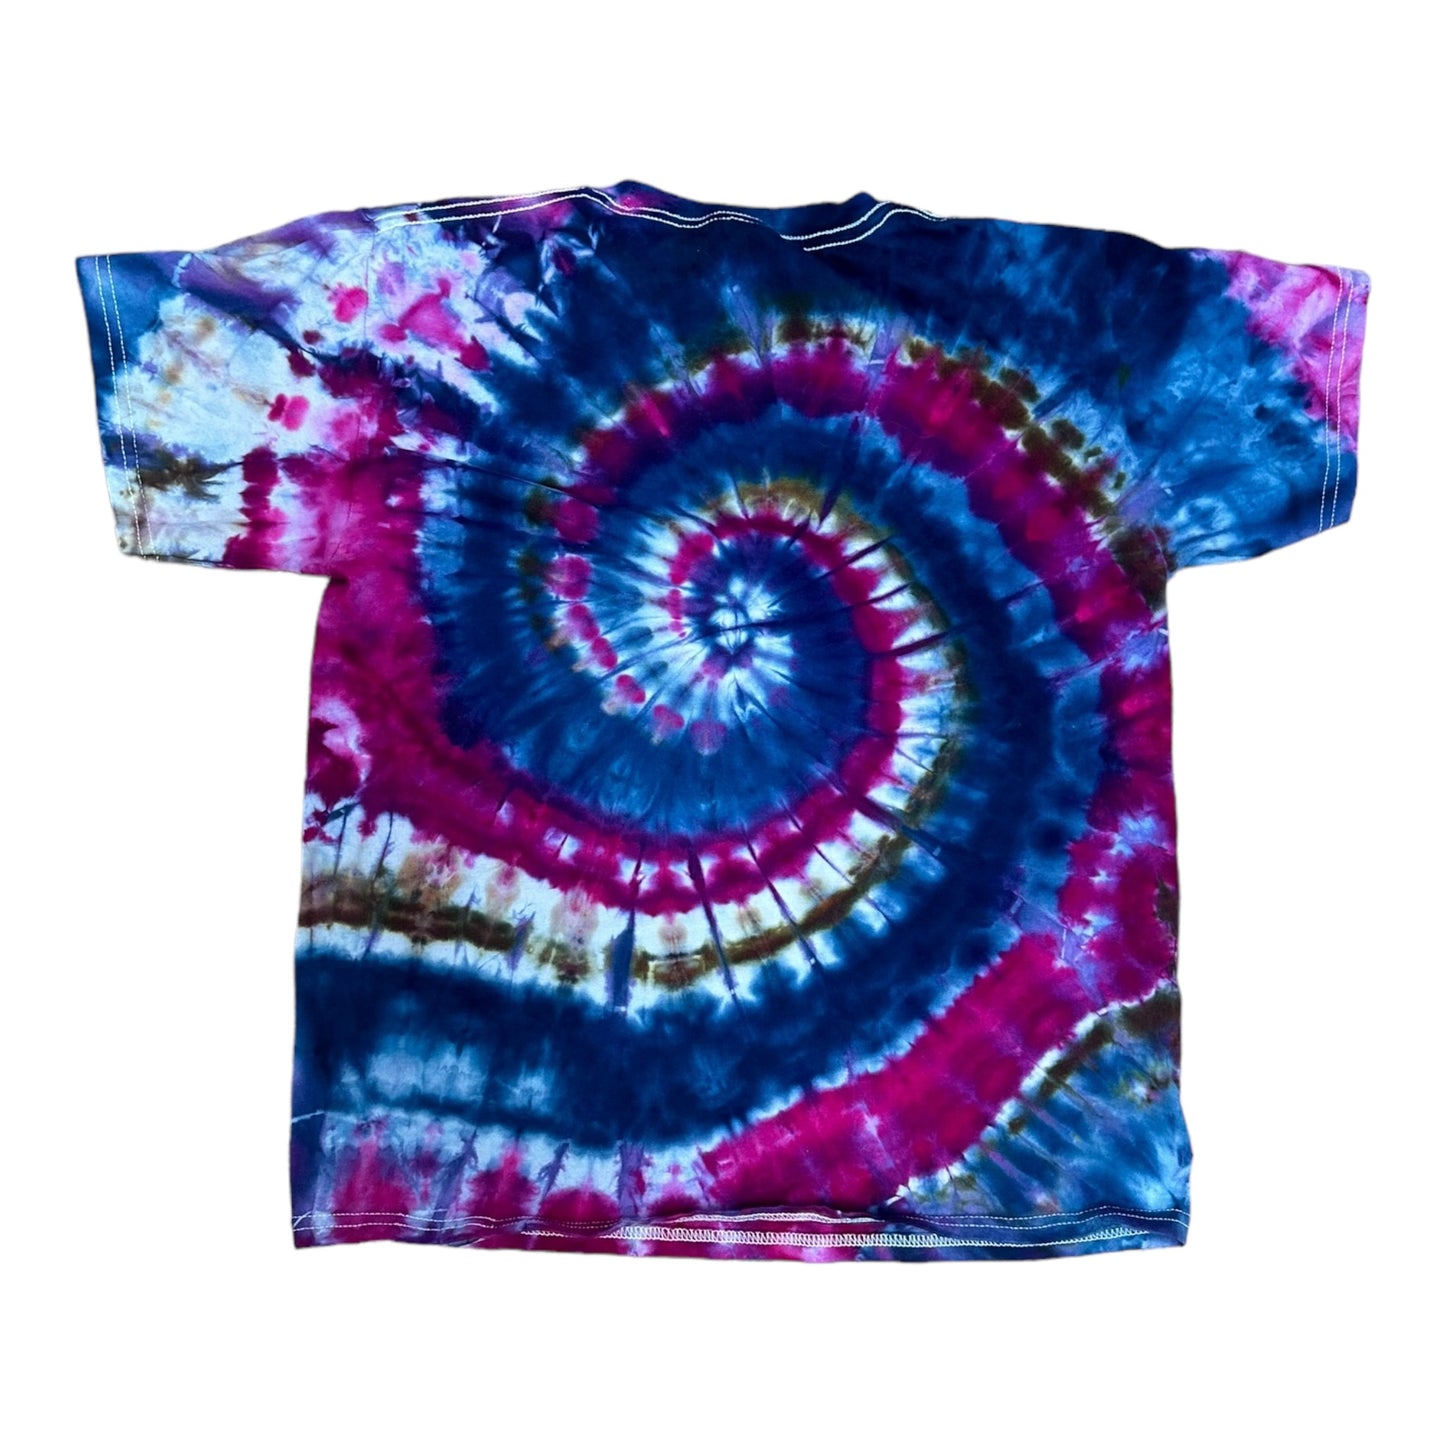 Youth Large Blue Brown and Purple Spiral Ice Dye Tie Dye Shirt